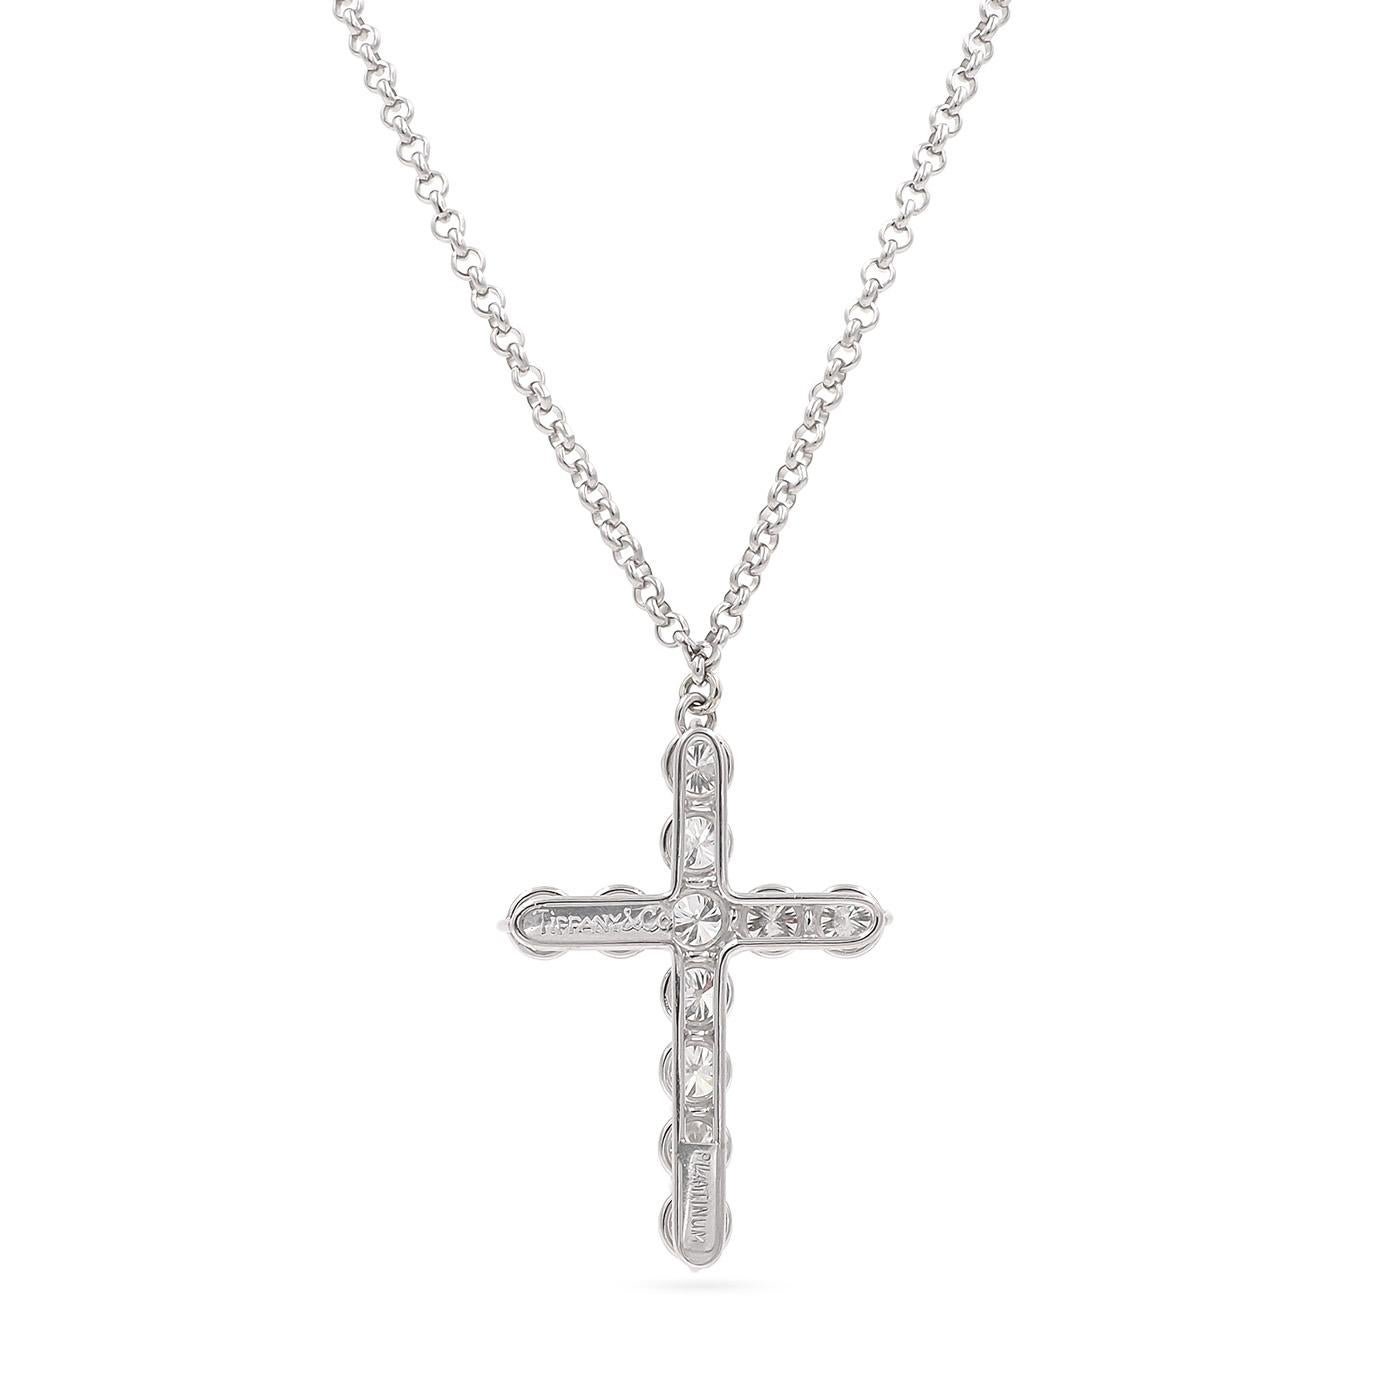 A rare 5.50 Ctw. Round Brilliant Cut Diamond Cross Pendant Necklace by Tiffany & Co., composed of platinum. Set with 11 Round Brilliant Cut diamonds weighing half a carat each, for a total carat weight of approximately 5.50 carats. Diamonds are